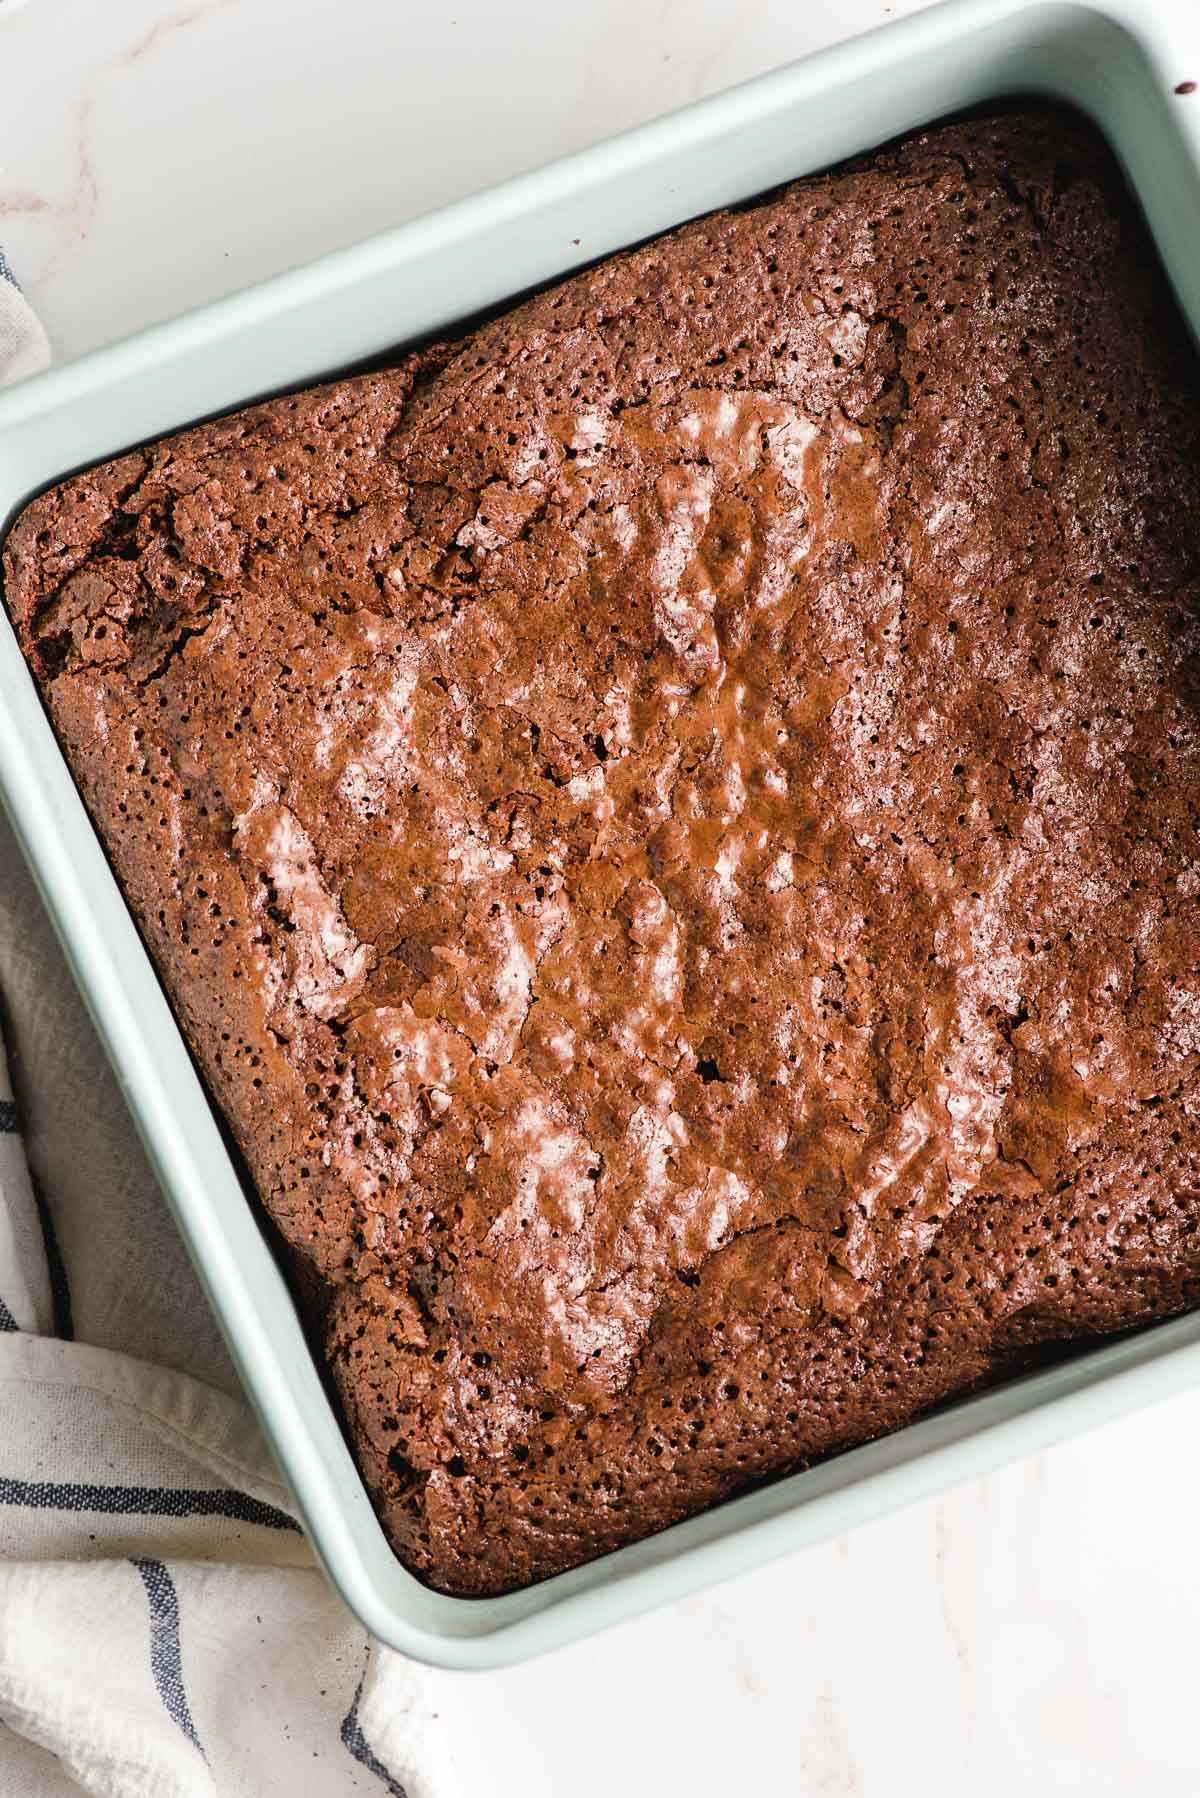 Fresh baked brownies in a square pan.